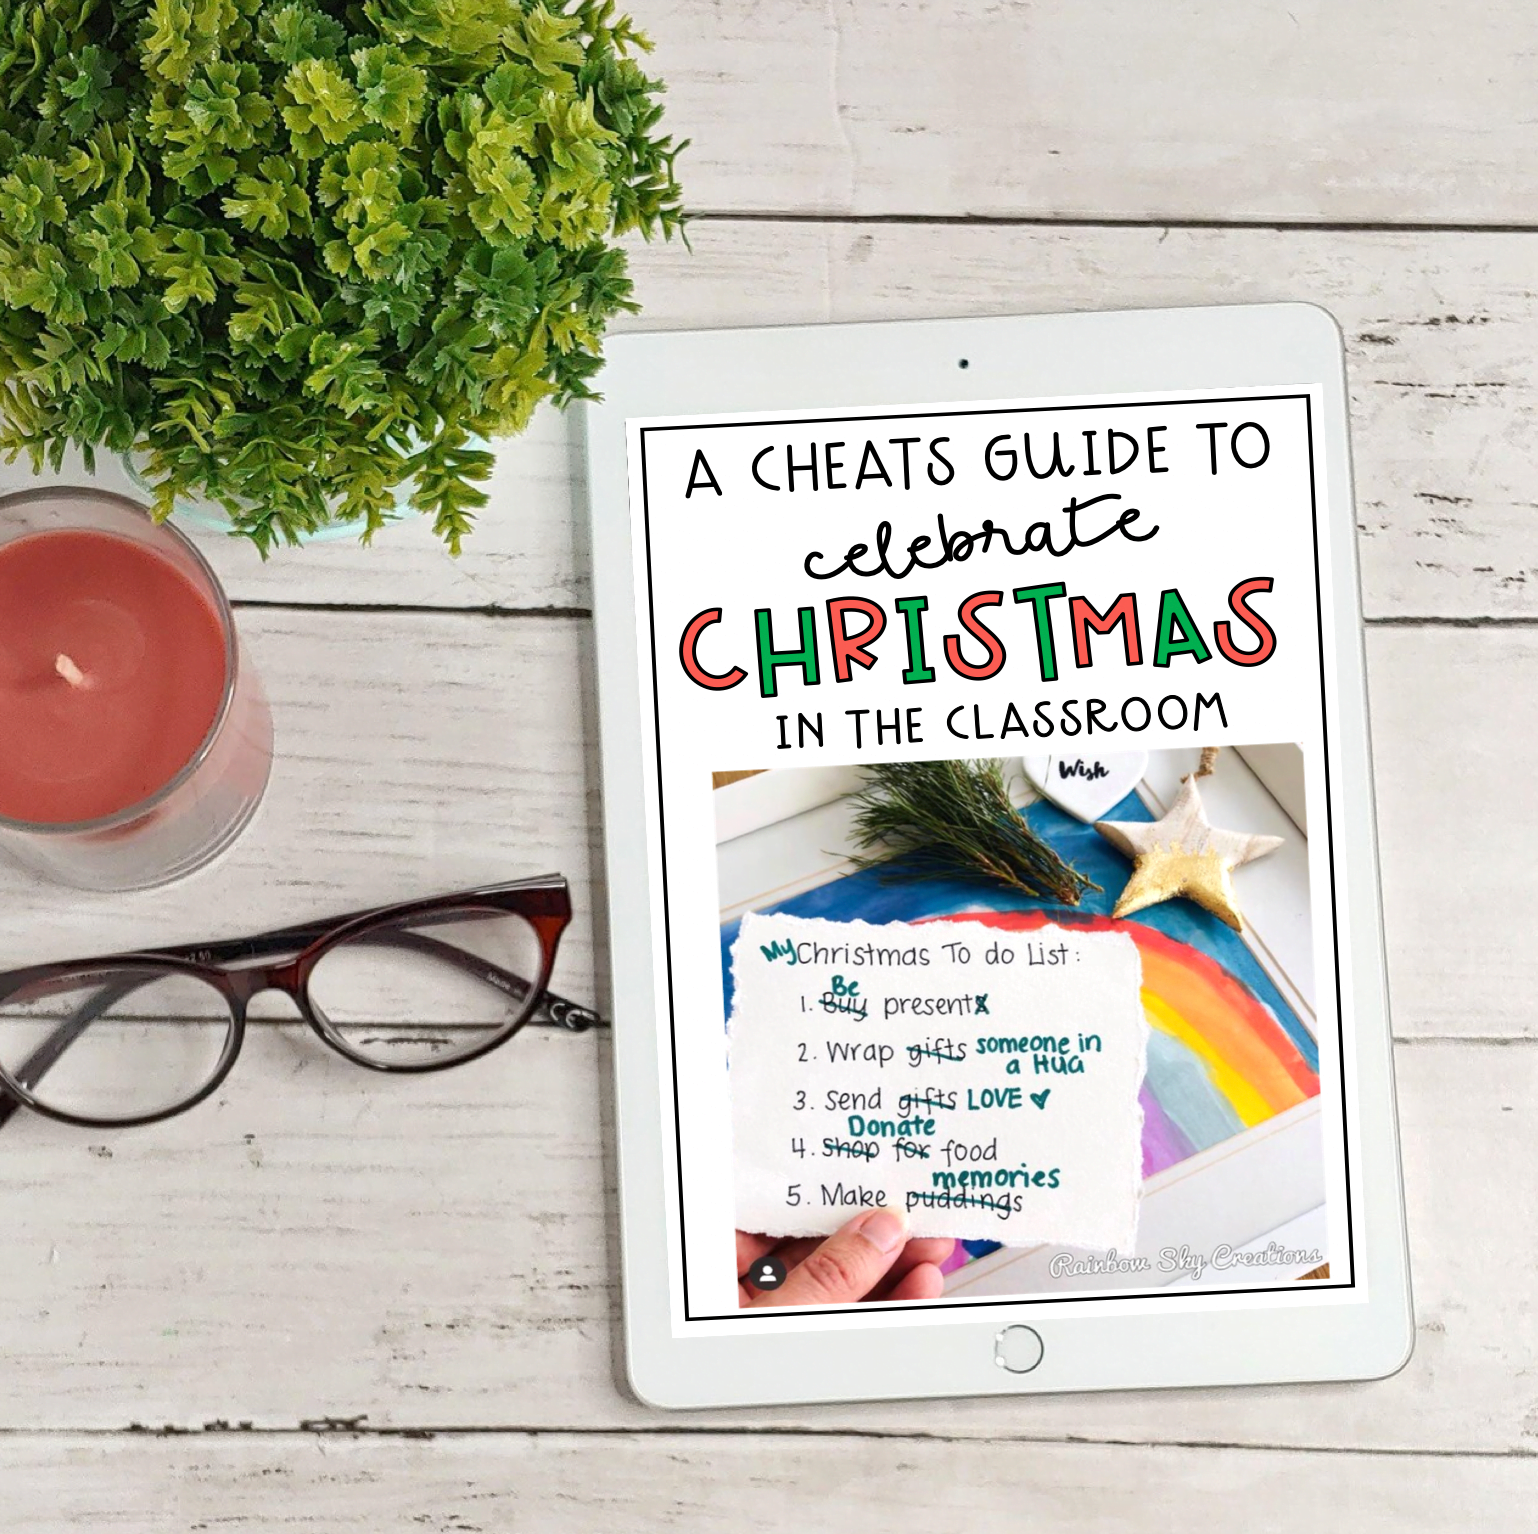 Christmas in the Classroom FREE guide for teachers.